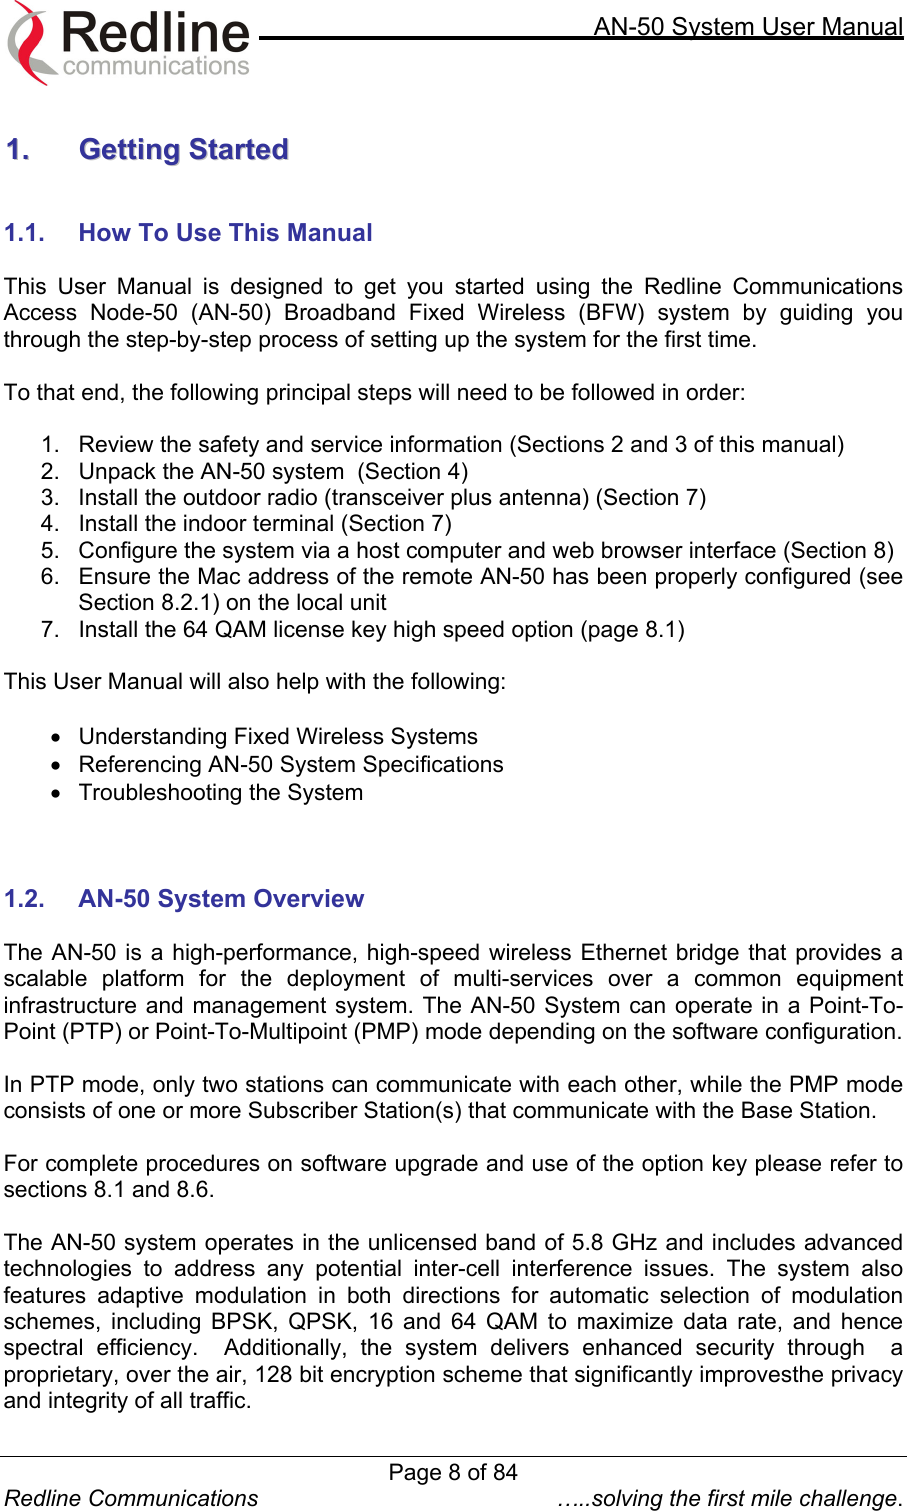     AN-50 System User Manual  Redline Communications  …..solving the first mile challenge.  11..  GGeettttiinngg  SSttaarrtteedd    1.1.  How To Use This Manual  This User Manual is designed to get you started using the Redline Communications Access Node-50 (AN-50) Broadband Fixed Wireless (BFW) system by guiding you through the step-by-step process of setting up the system for the first time.   To that end, the following principal steps will need to be followed in order:  1.  Review the safety and service information (Sections 2 and 3 of this manual) 2.  Unpack the AN-50 system  (Section 4) 3.  Install the outdoor radio (transceiver plus antenna) (Section 7) 4.  Install the indoor terminal (Section 7) 5.  Configure the system via a host computer and web browser interface (Section 8) 6.  Ensure the Mac address of the remote AN-50 has been properly configured (see Section 8.2.1) on the local unit 7.  Install the 64 QAM license key high speed option (page 8.1)  This User Manual will also help with the following:  •  Understanding Fixed Wireless Systems •  Referencing AN-50 System Specifications •  Troubleshooting the System    1.2.  AN-50 System Overview  The AN-50 is a high-performance, high-speed wireless Ethernet bridge that provides a scalable platform for the deployment of multi-services over a common equipment infrastructure and management system. The AN-50 System can operate in a Point-To-Point (PTP) or Point-To-Multipoint (PMP) mode depending on the software configuration.  In PTP mode, only two stations can communicate with each other, while the PMP mode consists of one or more Subscriber Station(s) that communicate with the Base Station.  For complete procedures on software upgrade and use of the option key please refer to sections 8.1 and 8.6.  The AN-50 system operates in the unlicensed band of 5.8 GHz and includes advanced technologies to address any potential inter-cell interference issues. The system also features adaptive modulation in both directions for automatic selection of modulation schemes, including BPSK, QPSK, 16 and 64 QAM to maximize data rate, and hence spectral efficiency.  Additionally, the system delivers enhanced security through  a proprietary, over the air, 128 bit encryption scheme that significantly improvesthe privacy and integrity of all traffic. Page 8 of 84